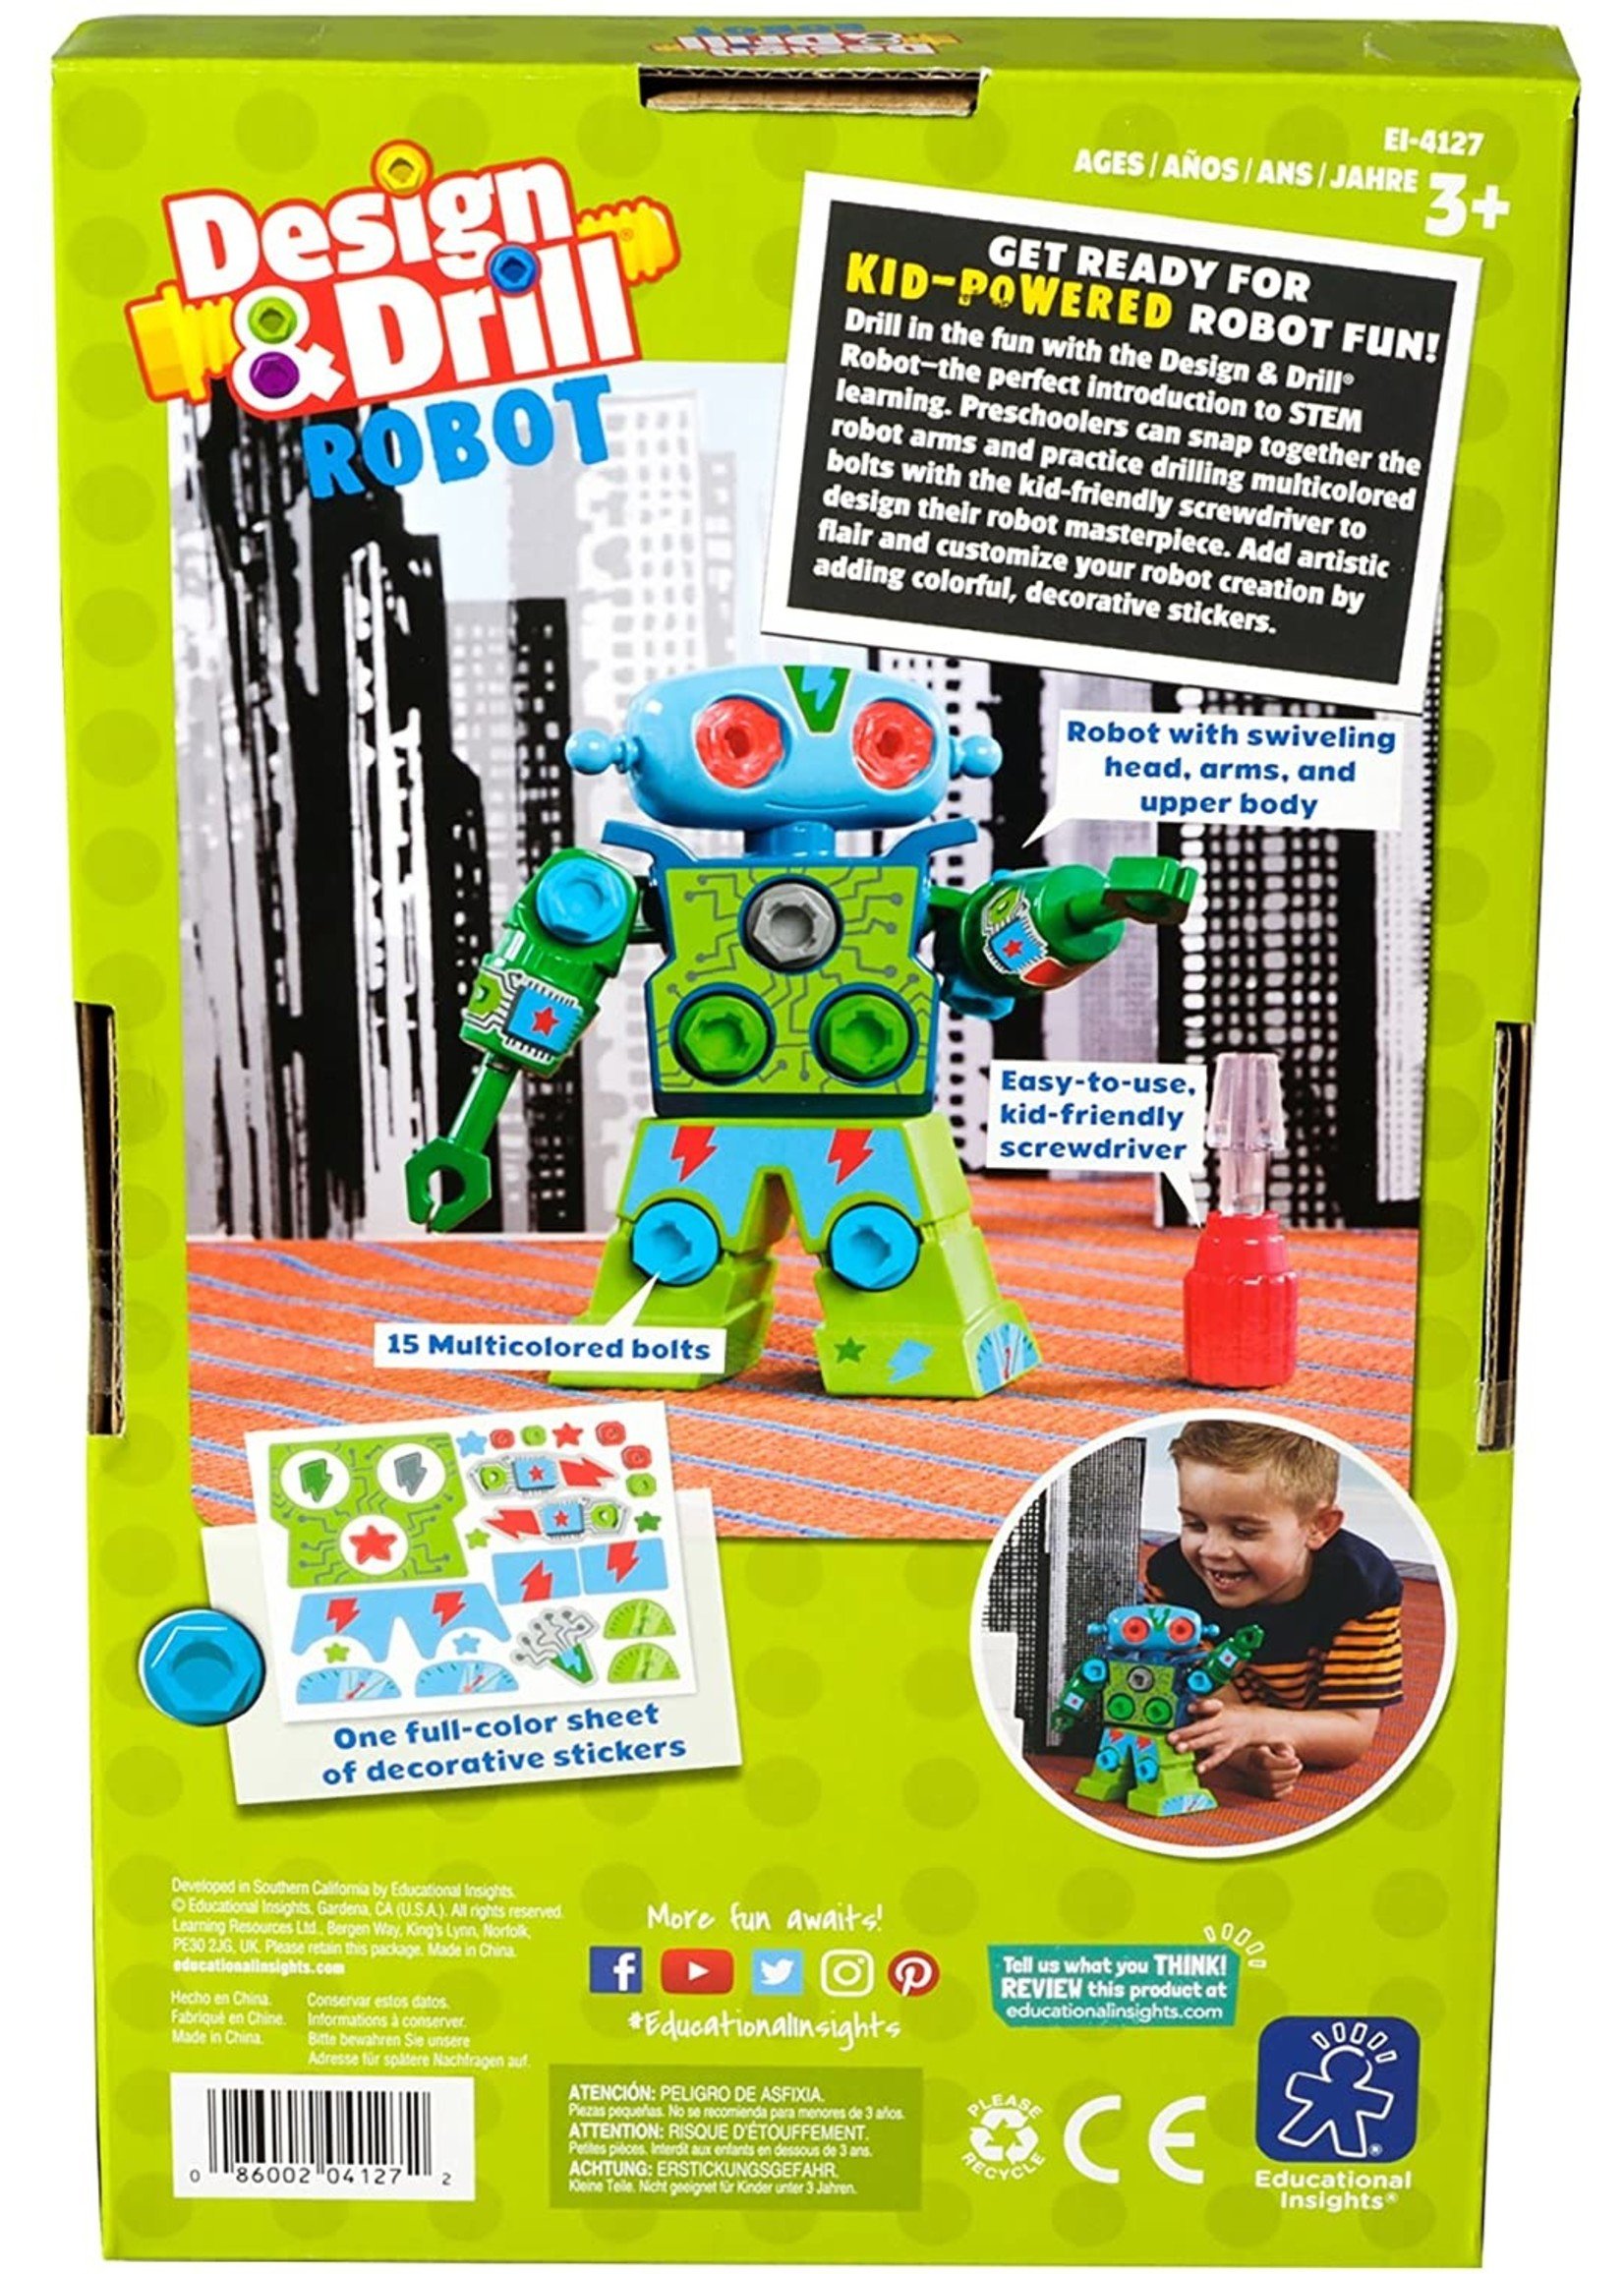 Educational Insights Design and Drill Robot